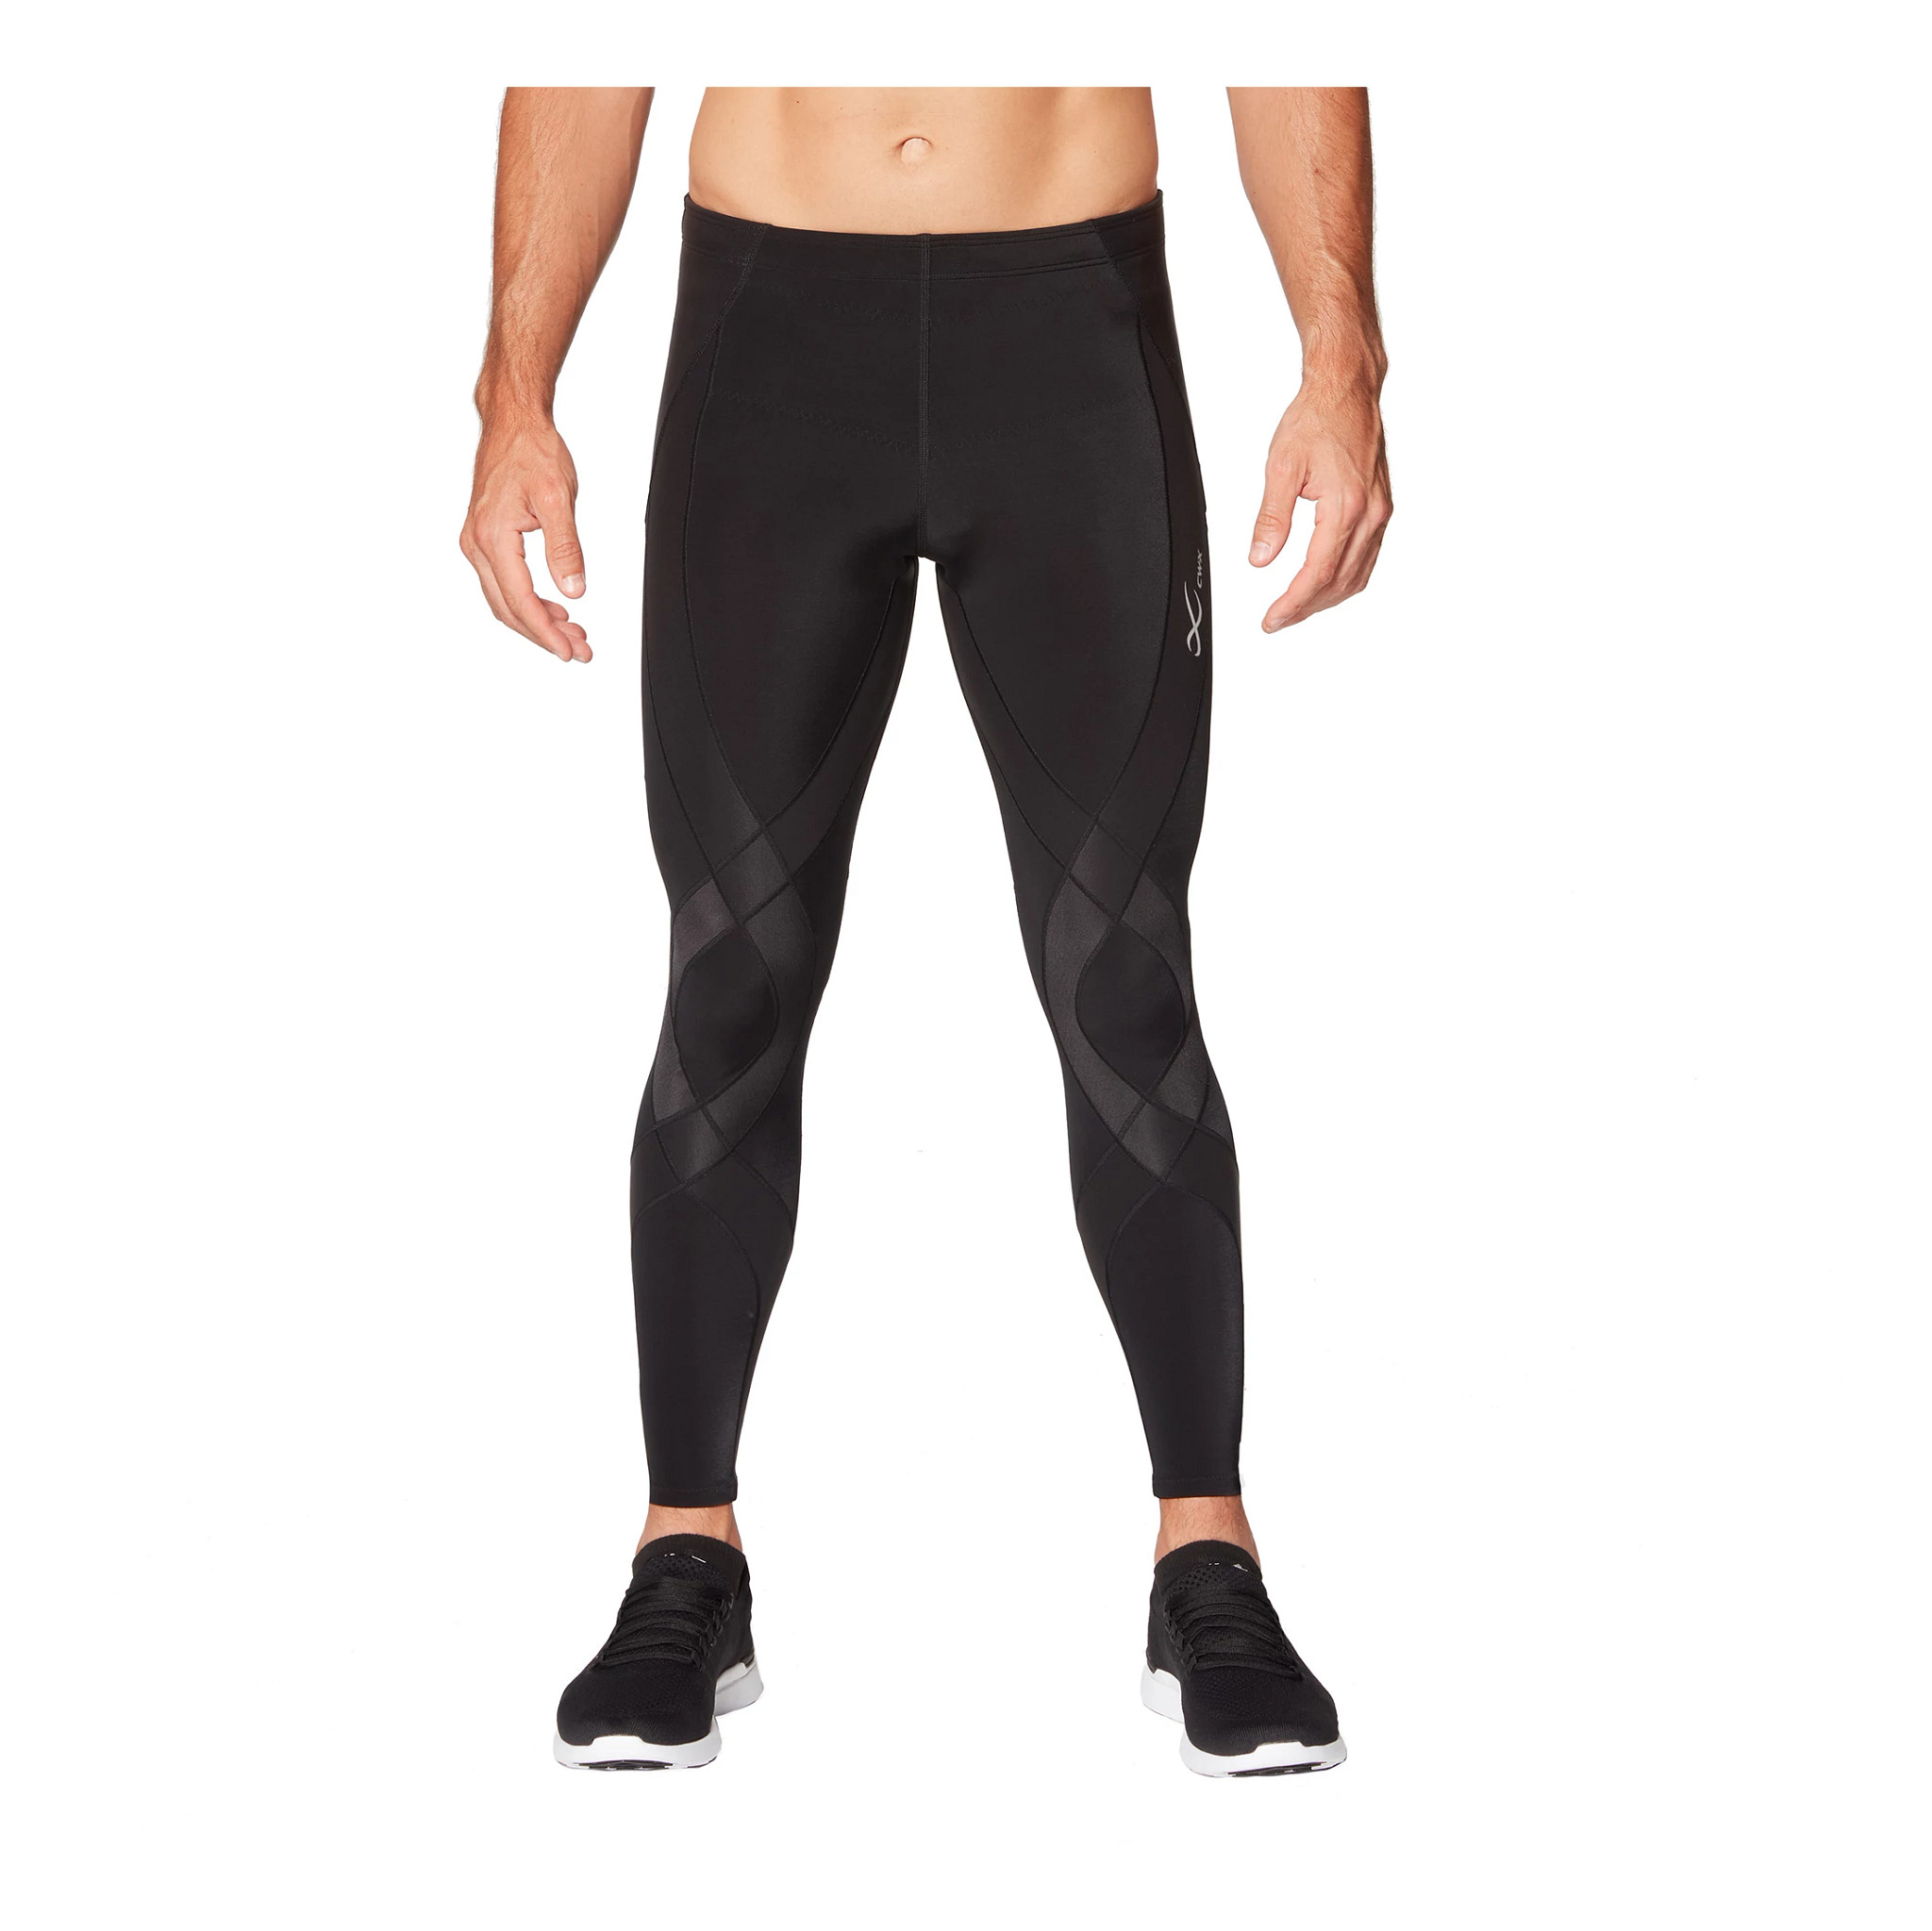 Mens CW-X Endurance Generator Joint and Muscle Support Compression